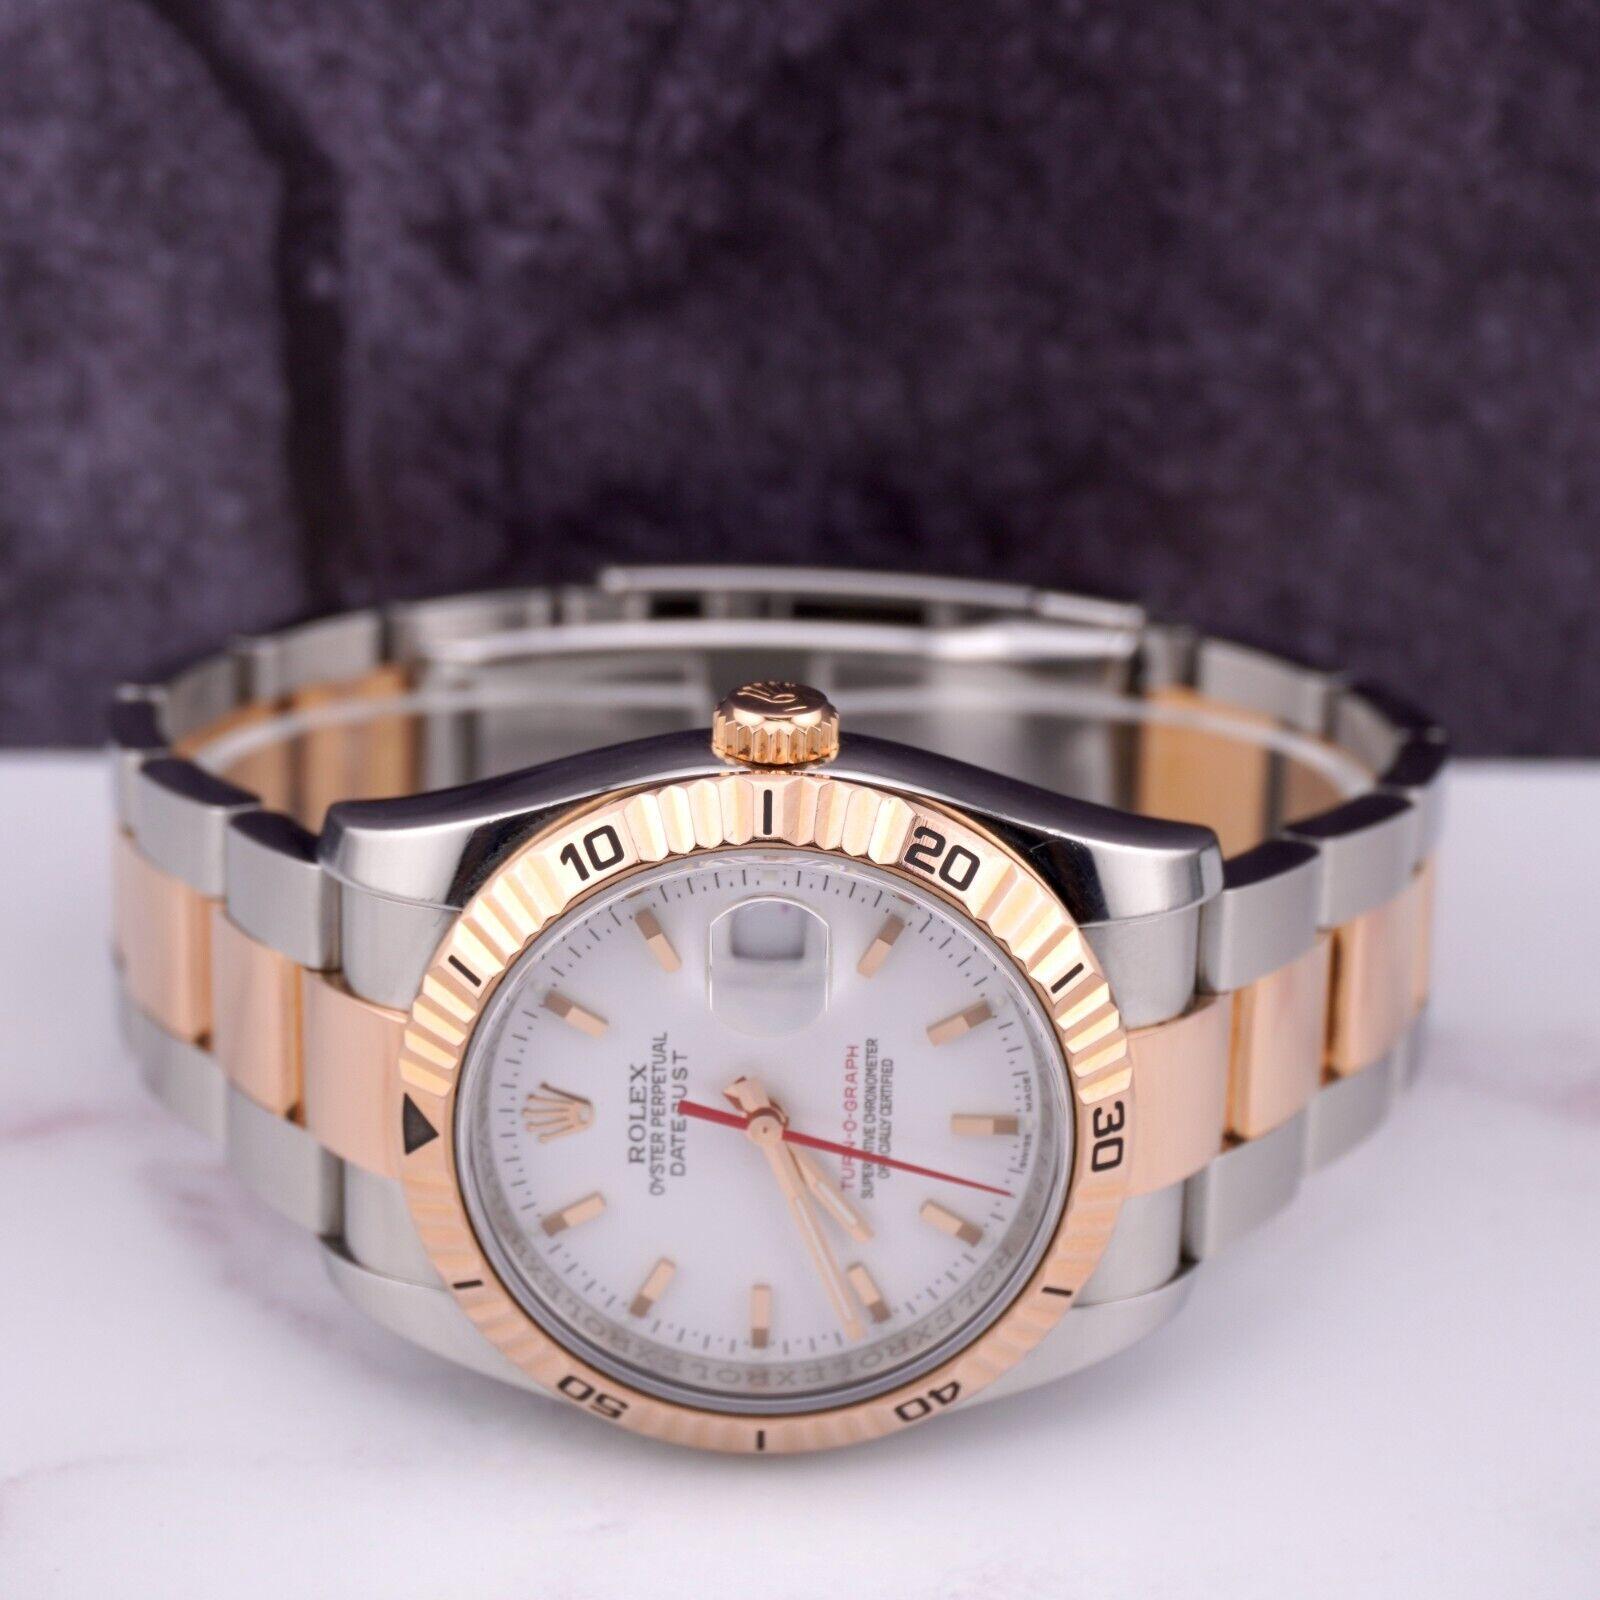 Rolex Men Datejust 36mm Turn-O-Graph 18K Rose Gold/Steel Watch Oyster 116261 For Sale 1